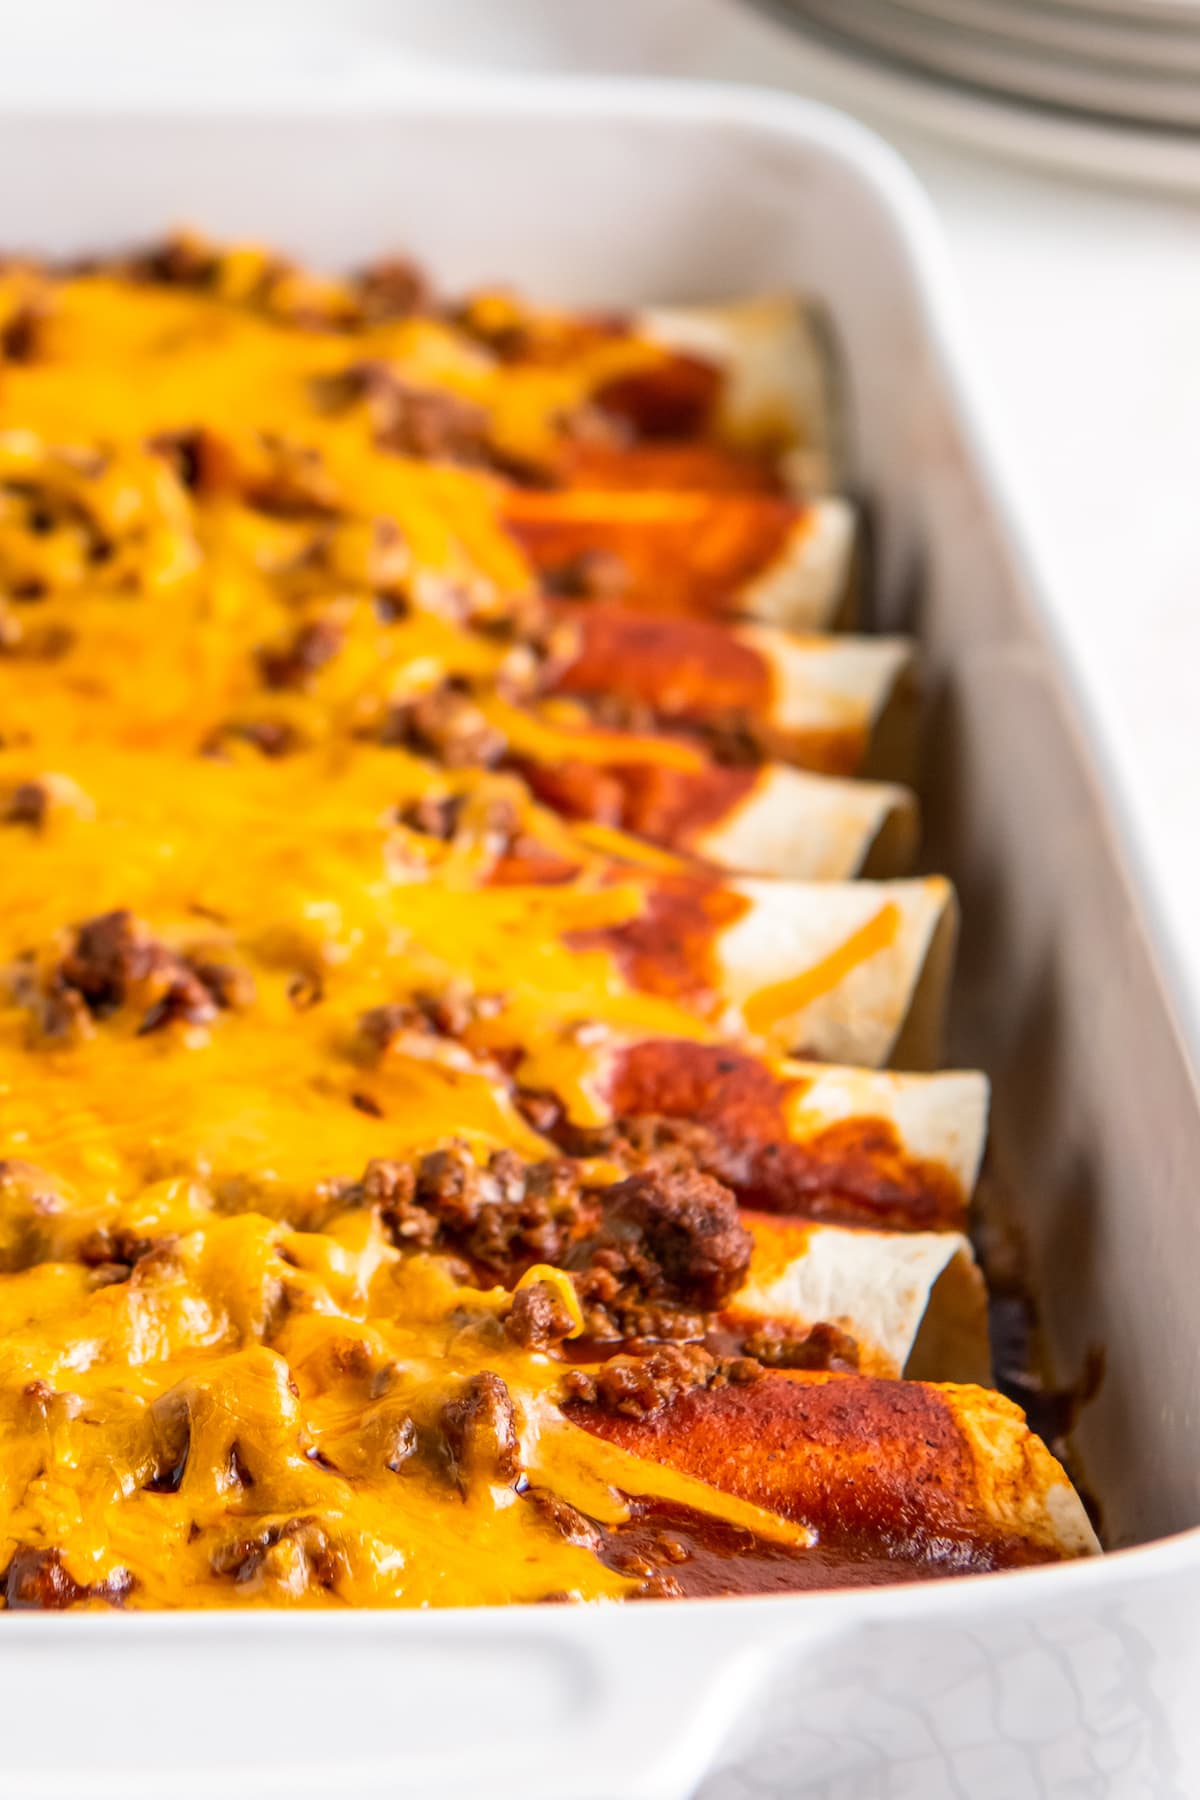 beef enchiladas that are topped with melted cheese and red sauce